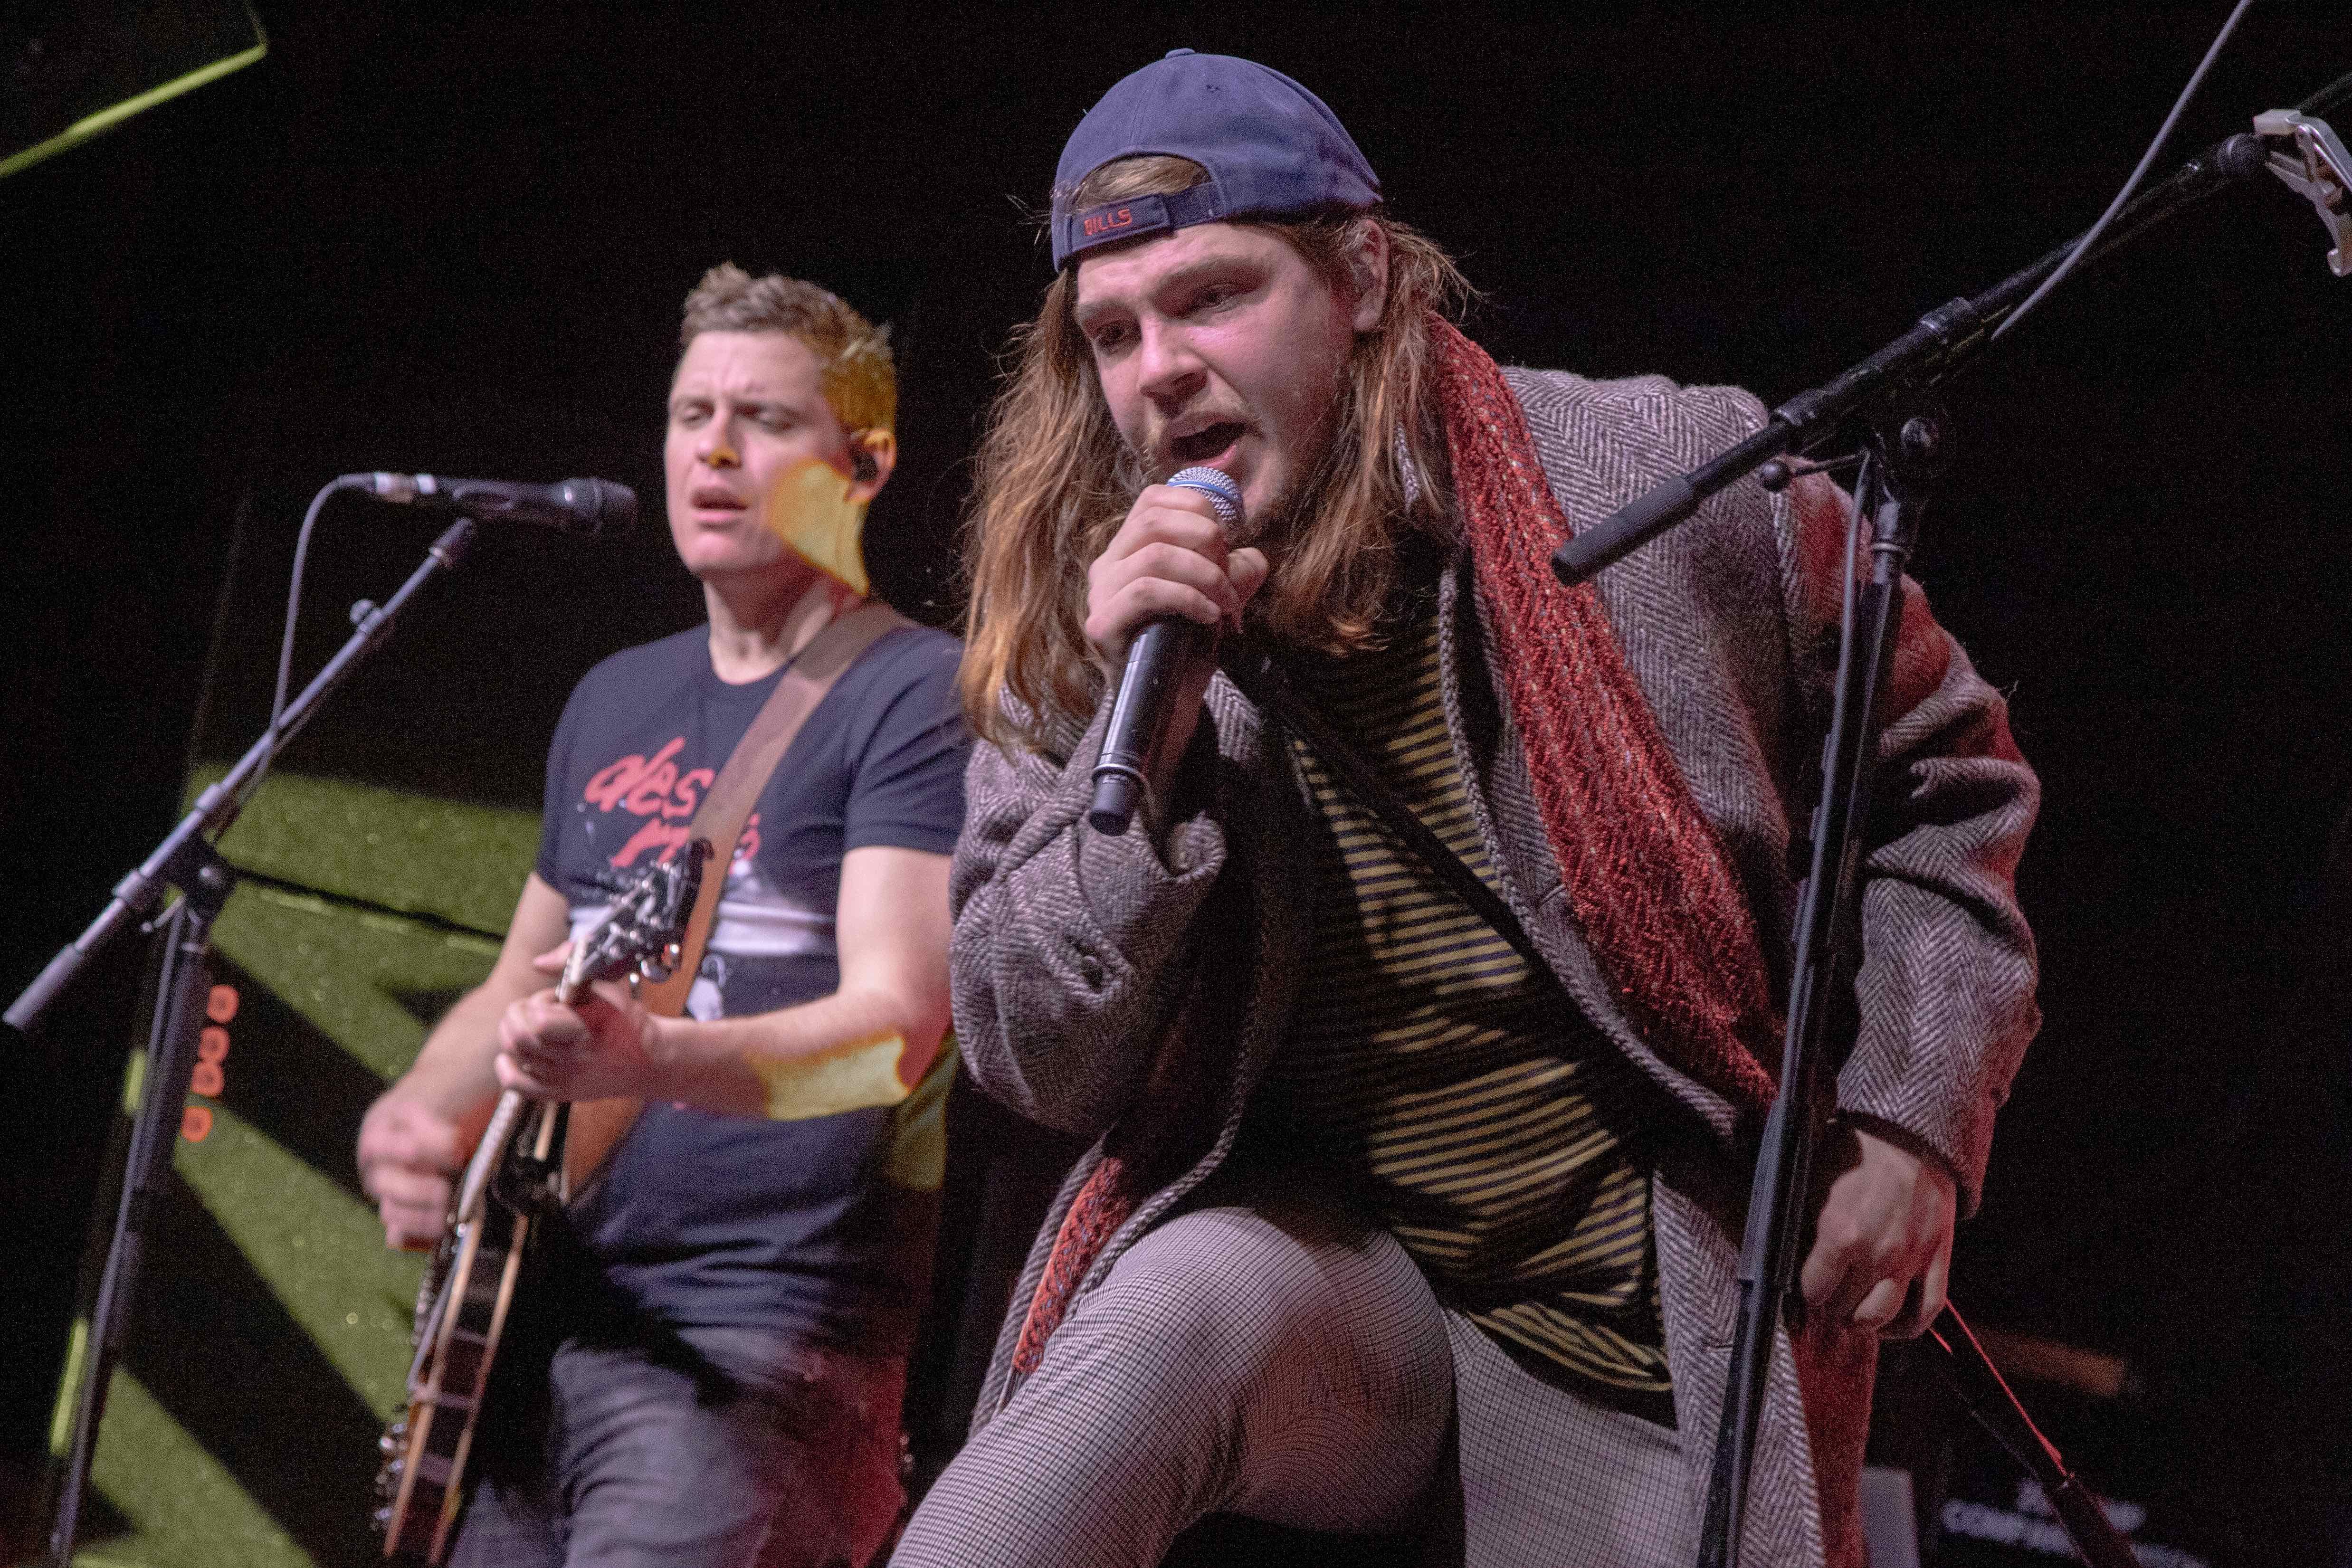 The Glorious Sons conquer a sold-out Sinclair